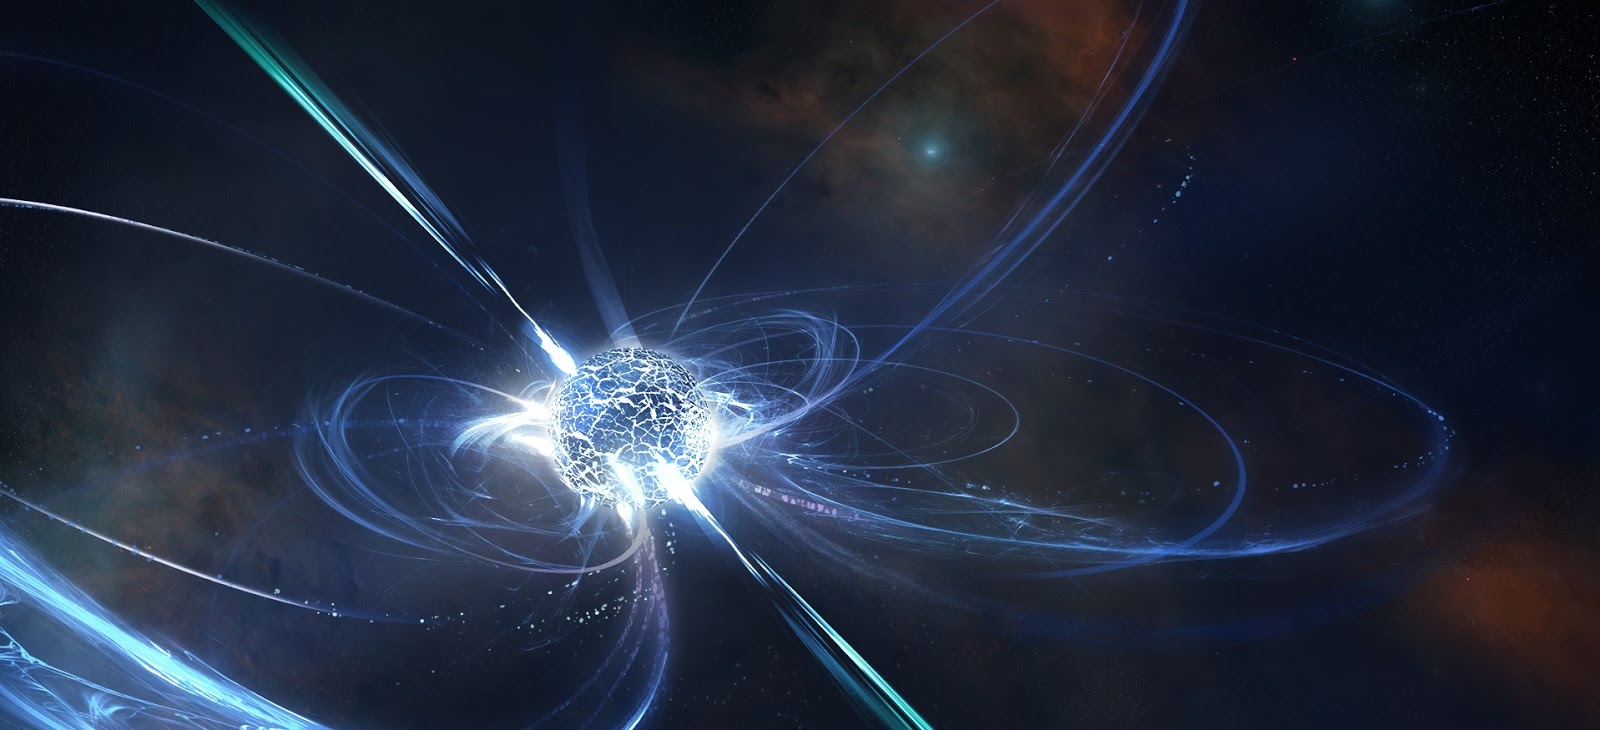 Why Magnetars Should Freak You Out